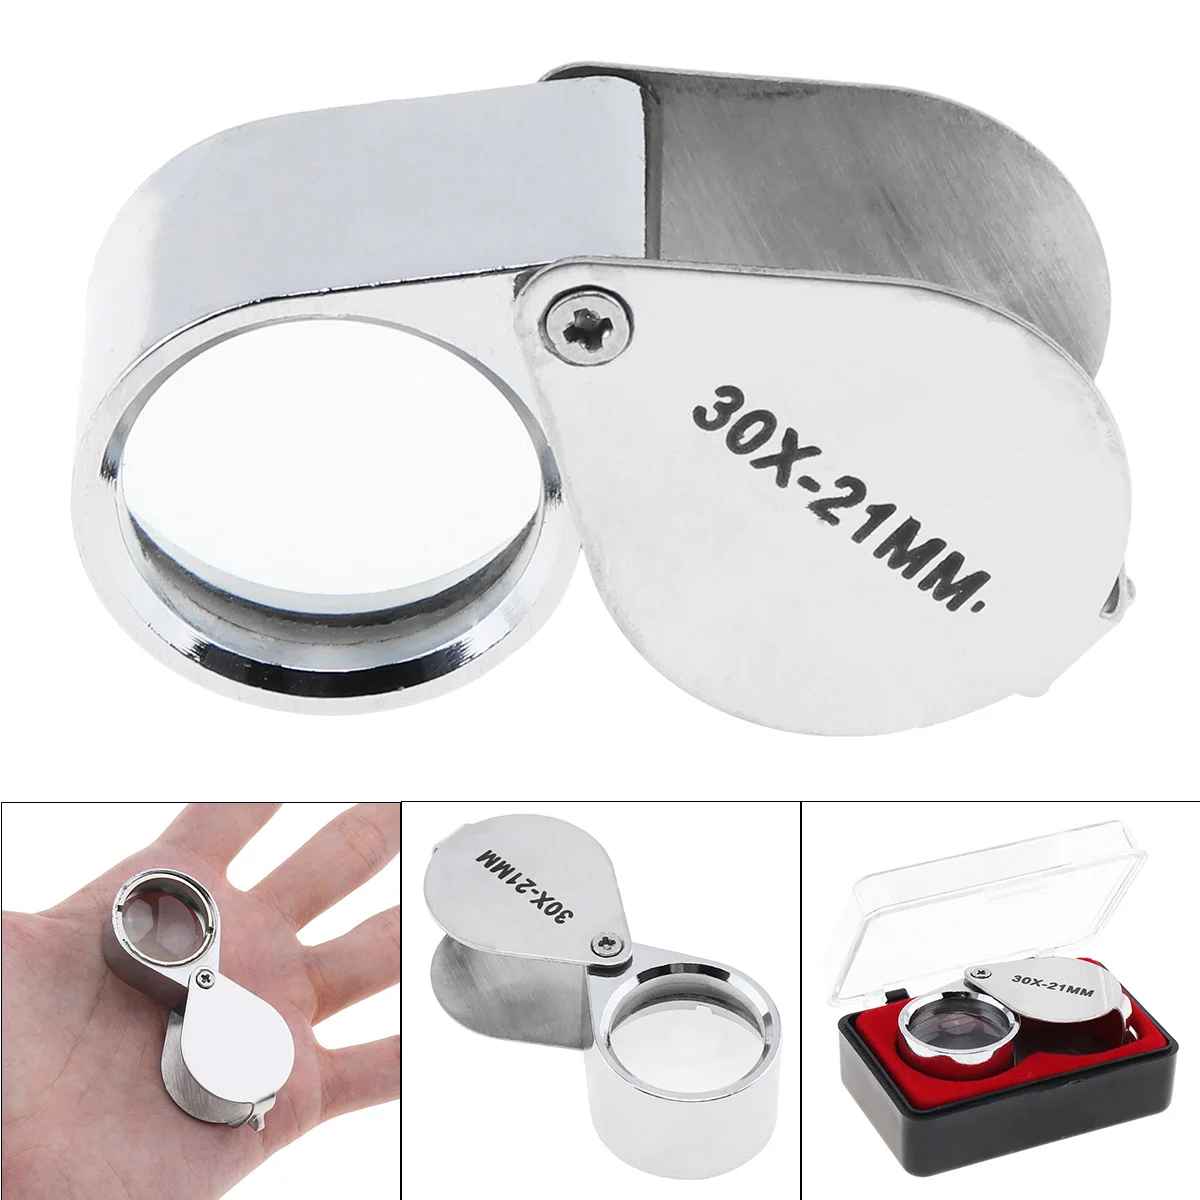 

30X 21mm Magnifier Metal + Optical Glass Lens Silvery Foldable Portable Magnifying Glass for Reading / Jewelry